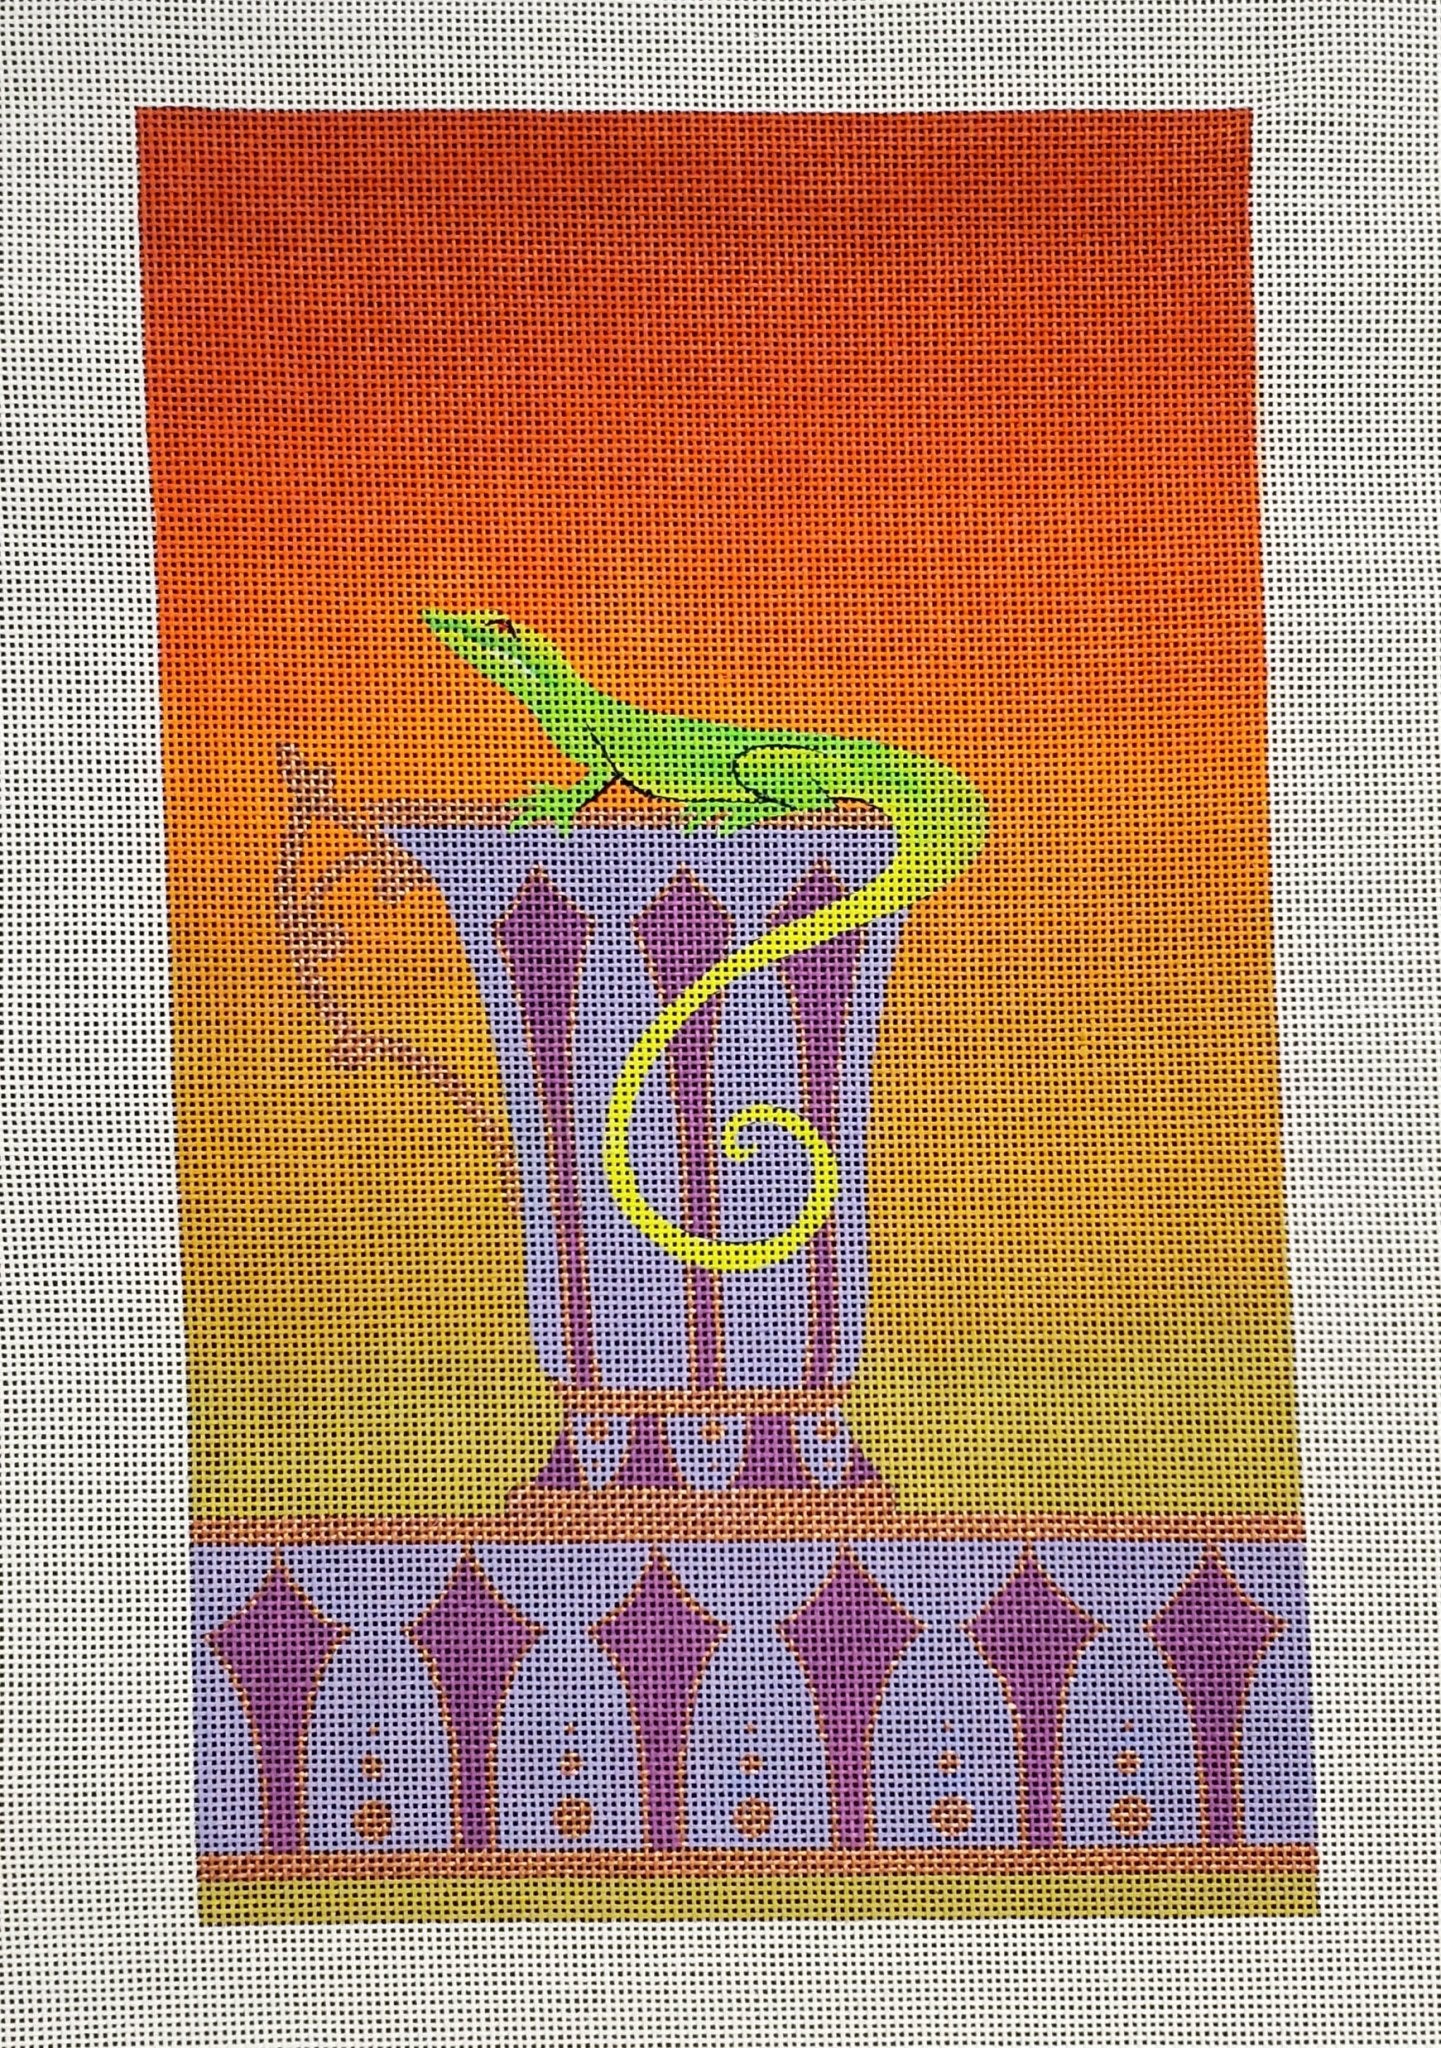 Lizard on a Tea Cup - The Flying Needles